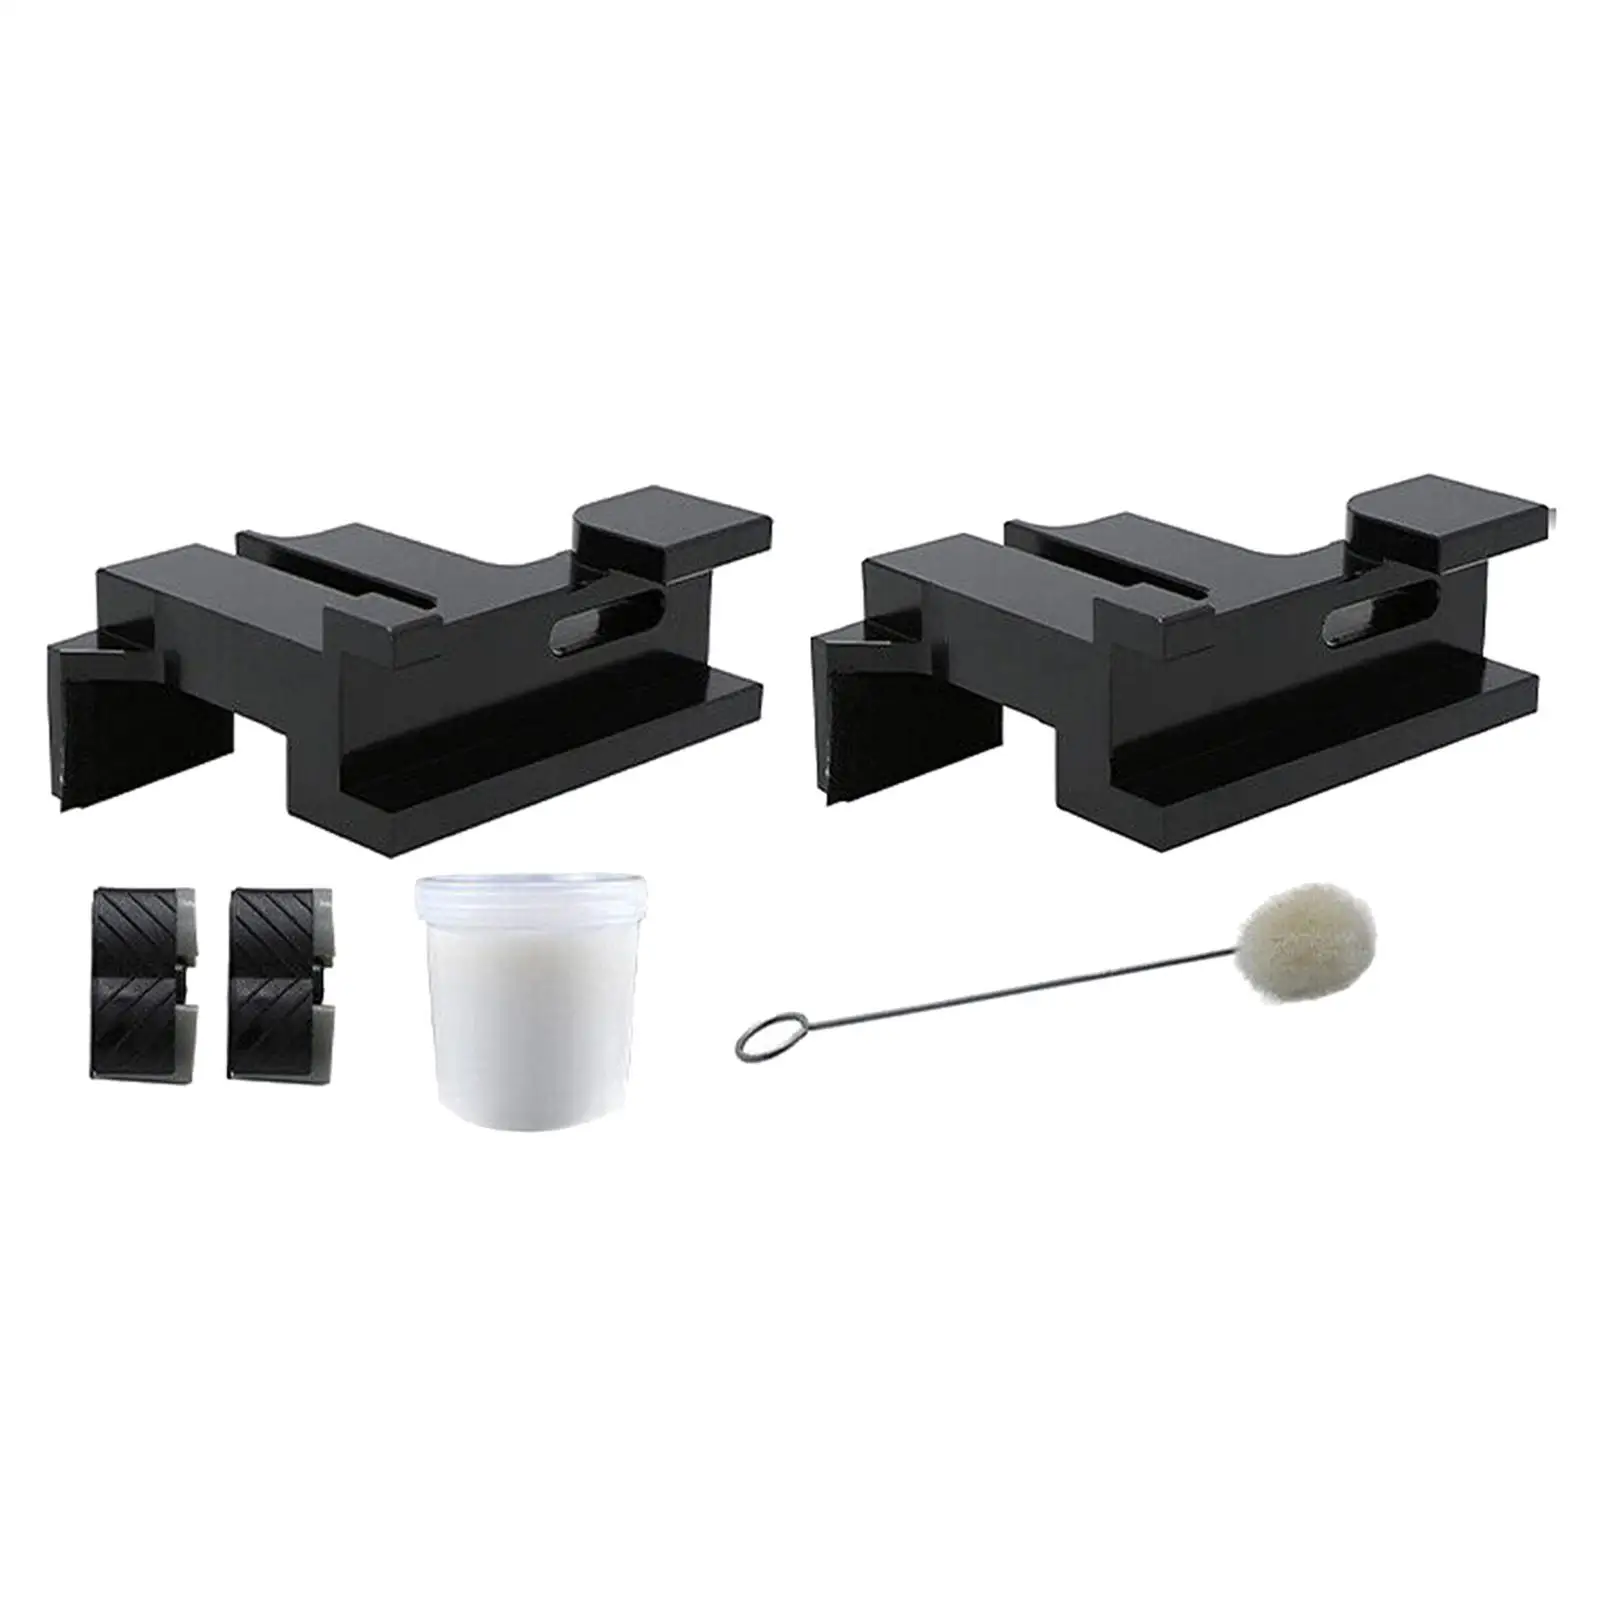 Sunroof Track Assembly Repair Set Replaces Part for Ford Edge (2007-2014)